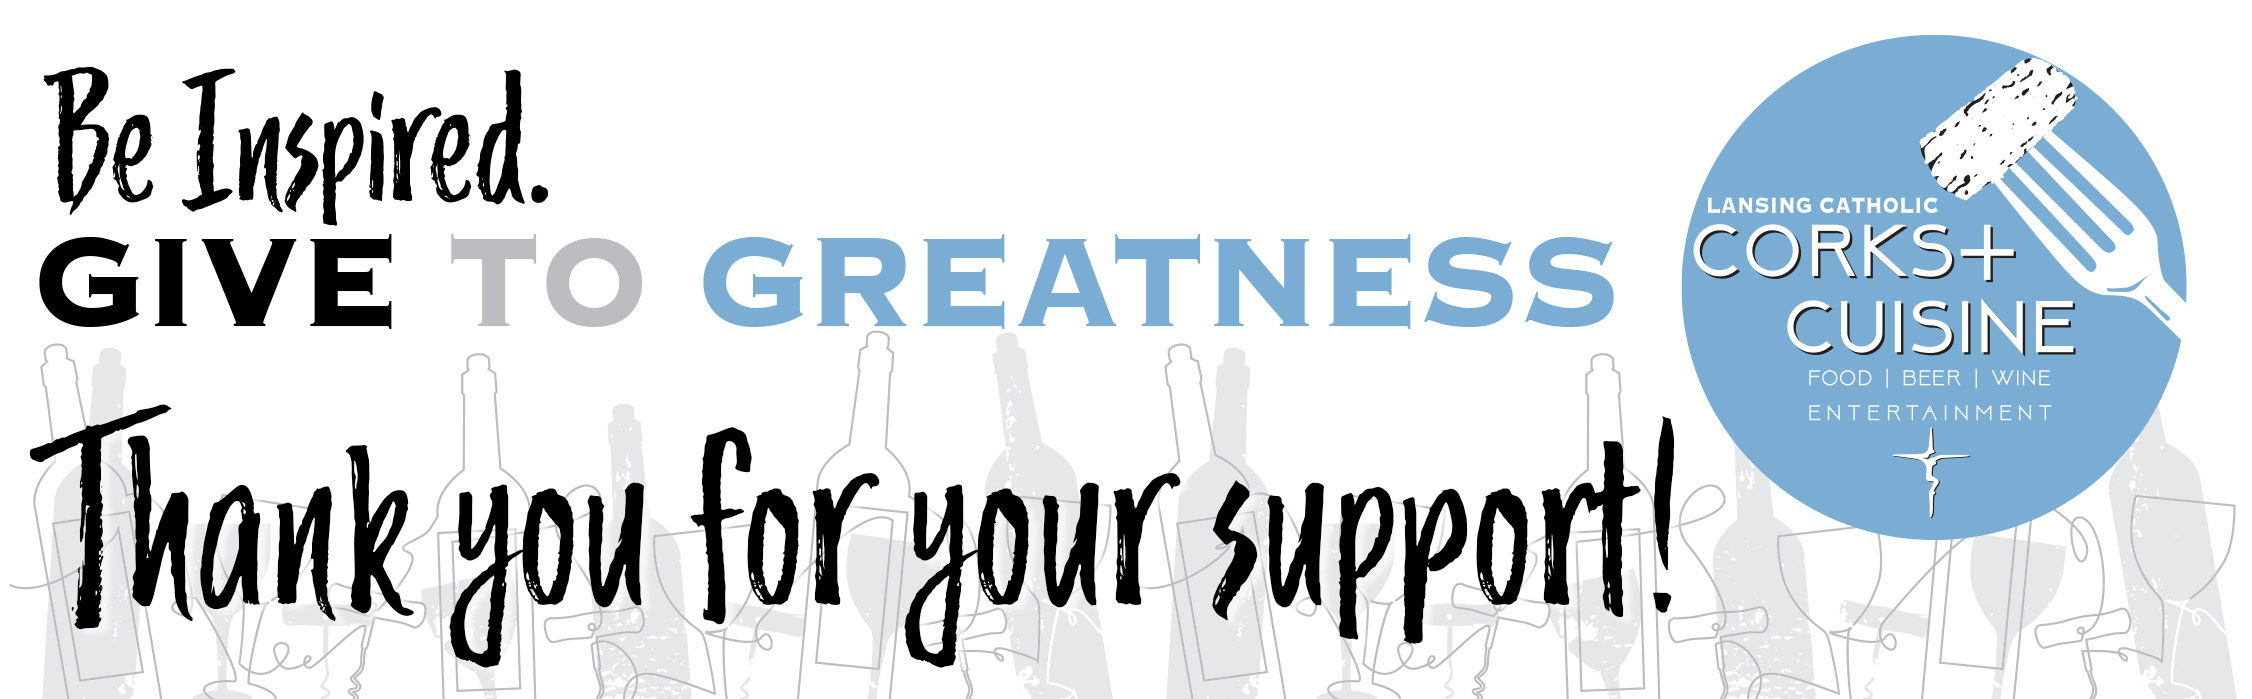 Be Inspired. Give to Greatness. Thank you for your support. 